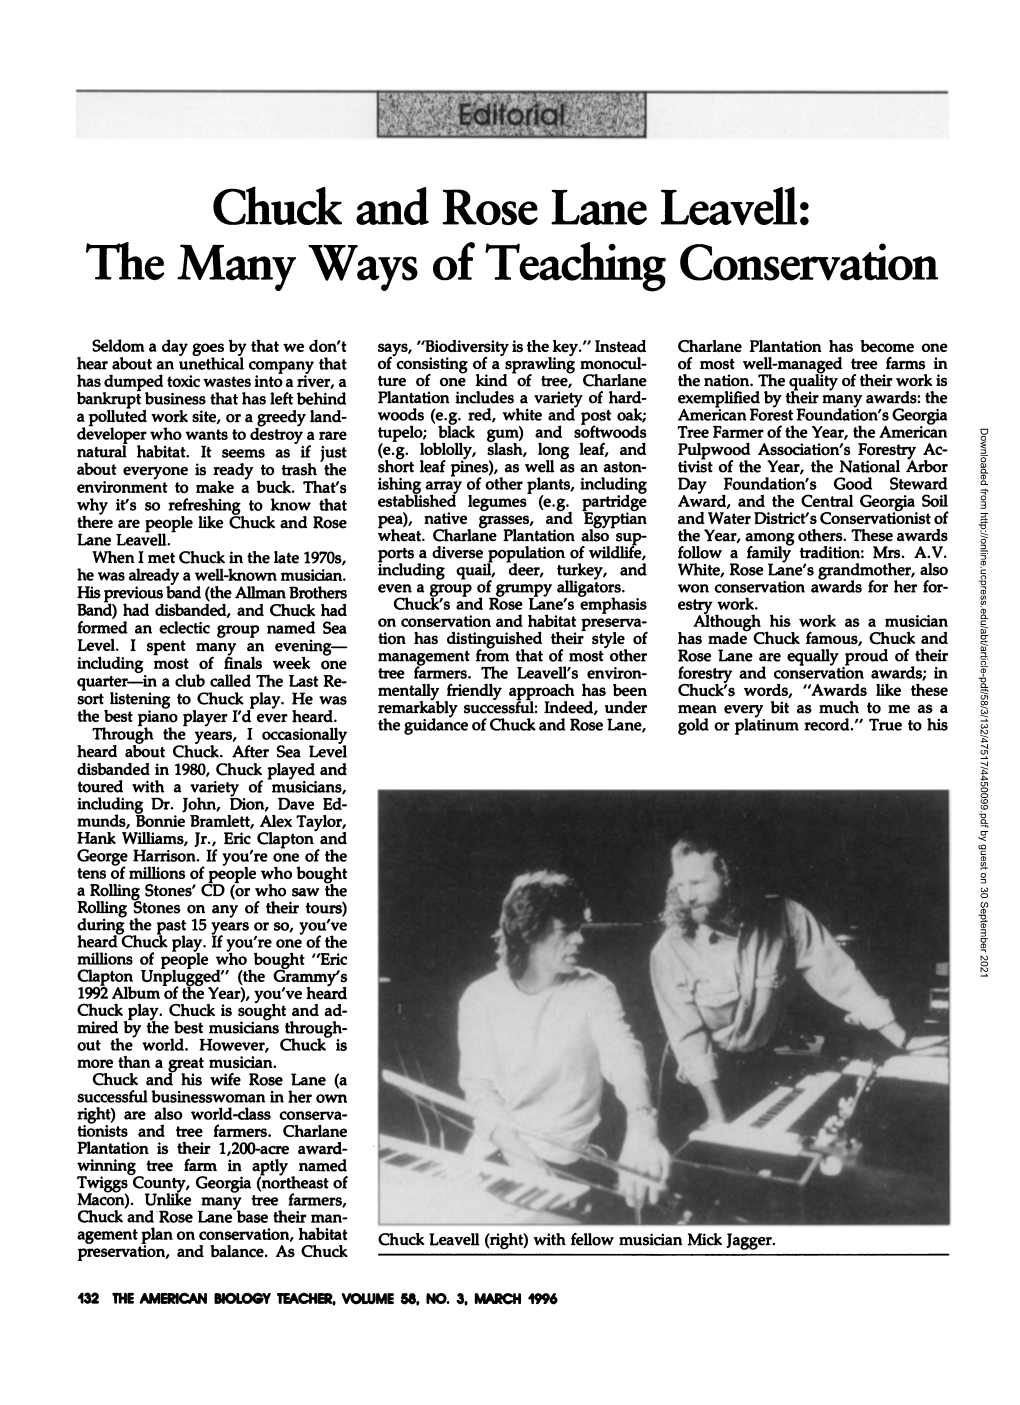 Chuck and Rose Lane Leavell: the Many Ways of Teaching Conservation